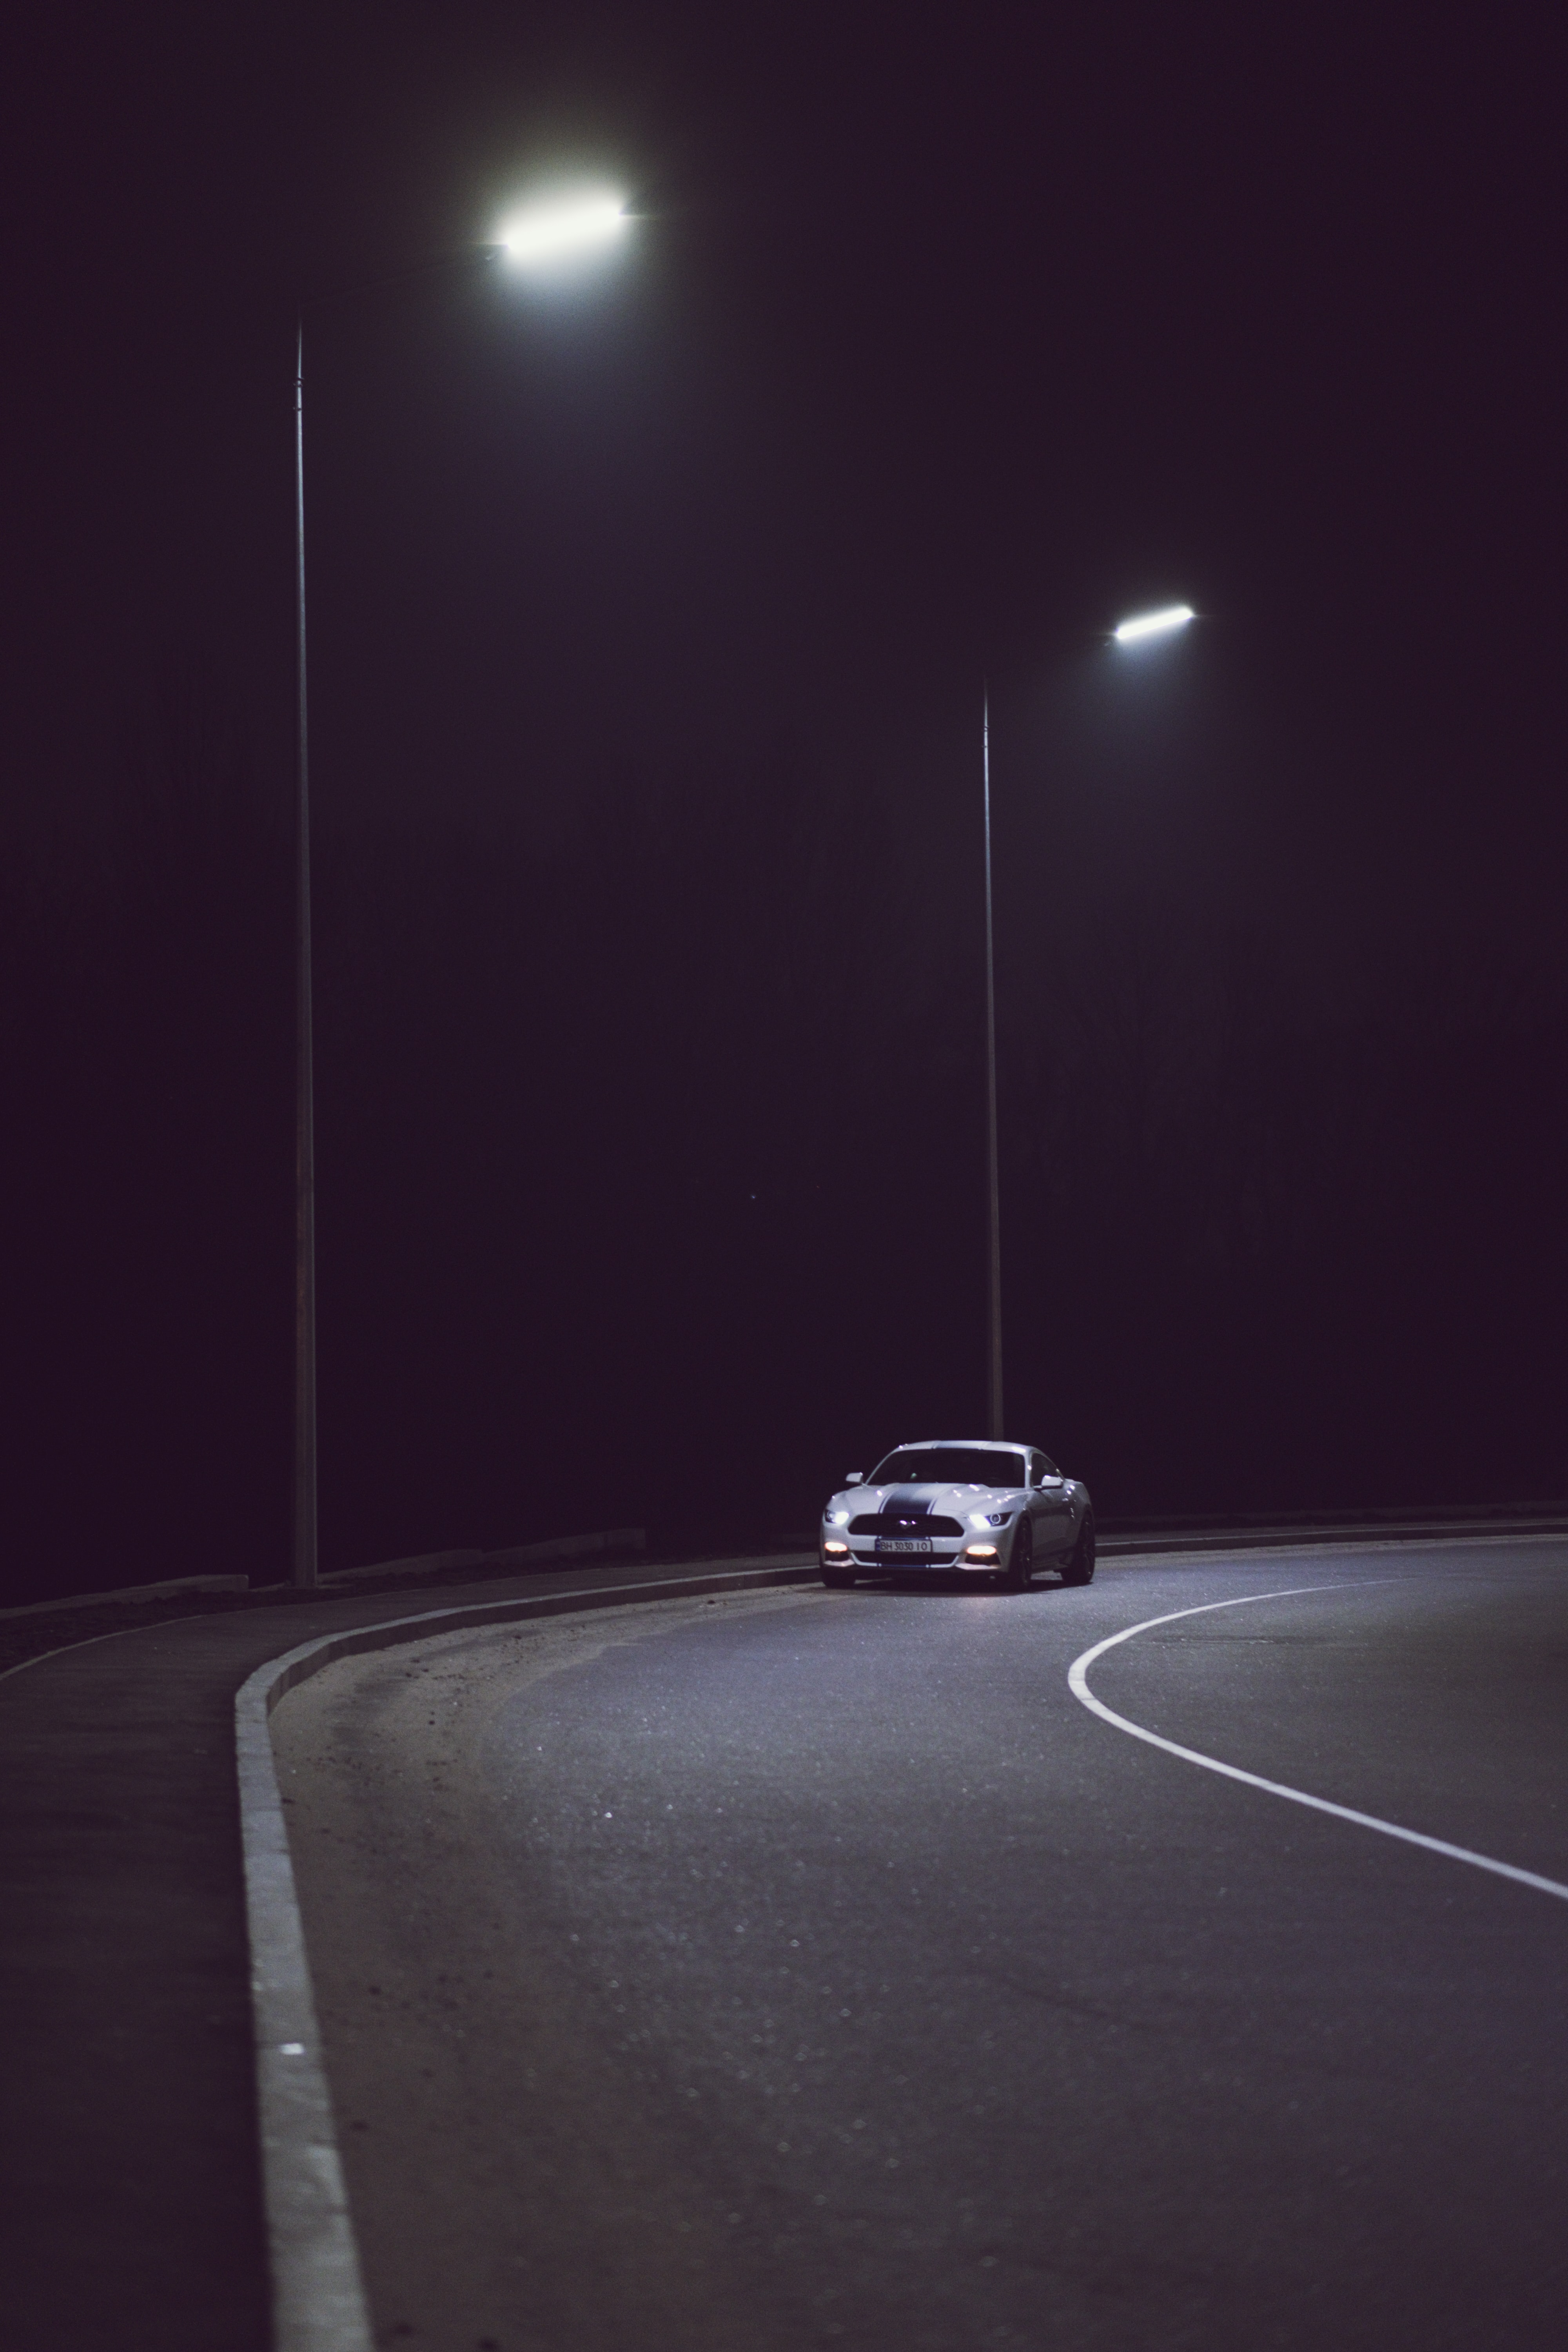 Mobile wallpaper: Road, Machine, Lantern, Car, Lamp, Cars, Night, 109392  download the picture for free.